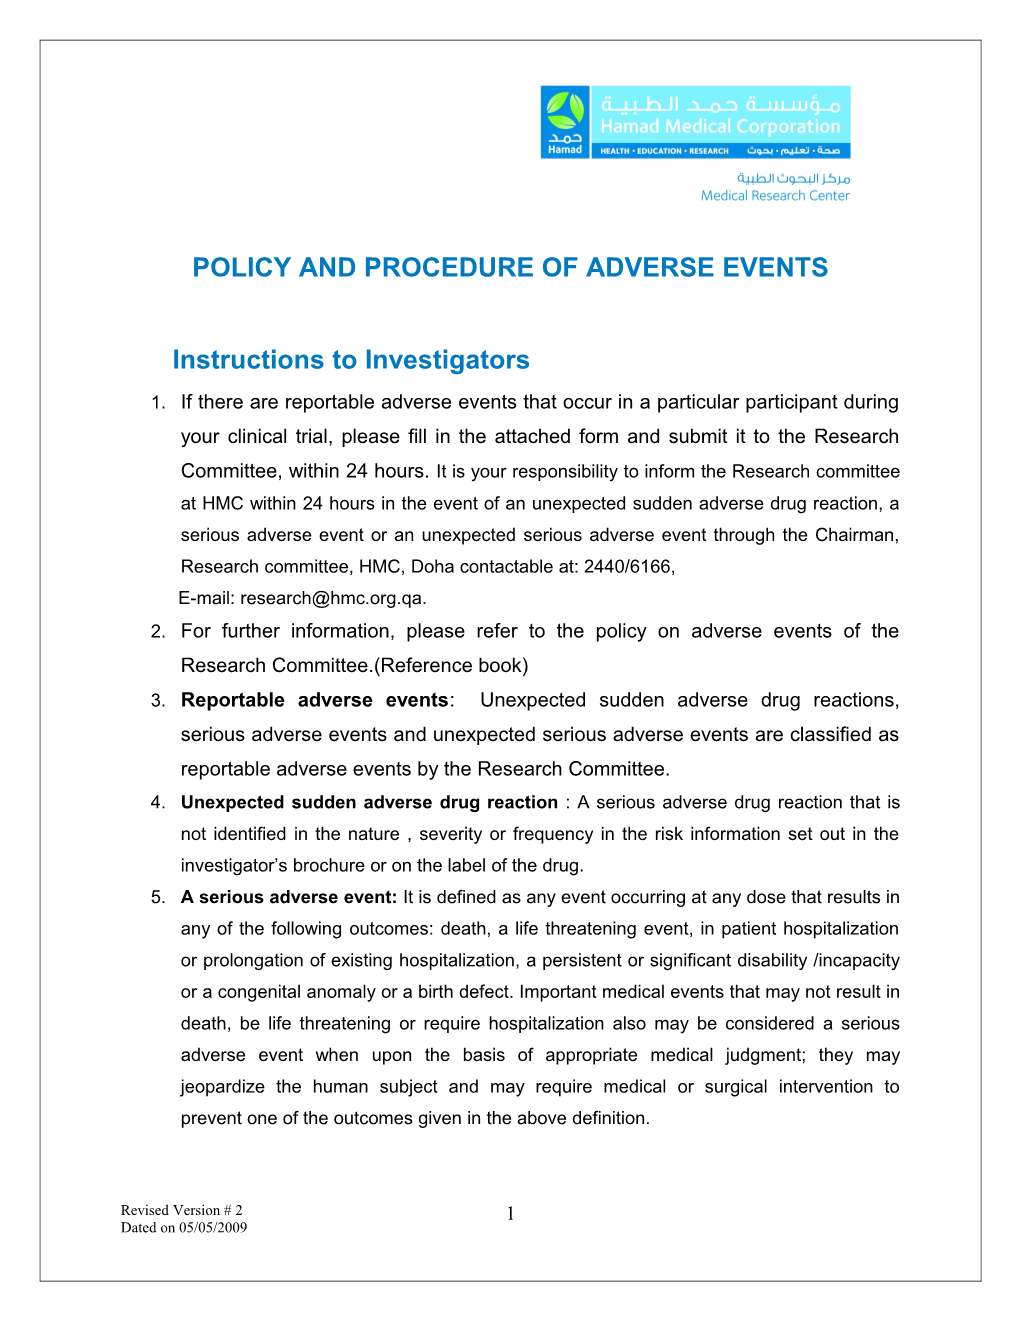 Policy and Procedure of Adverse Events